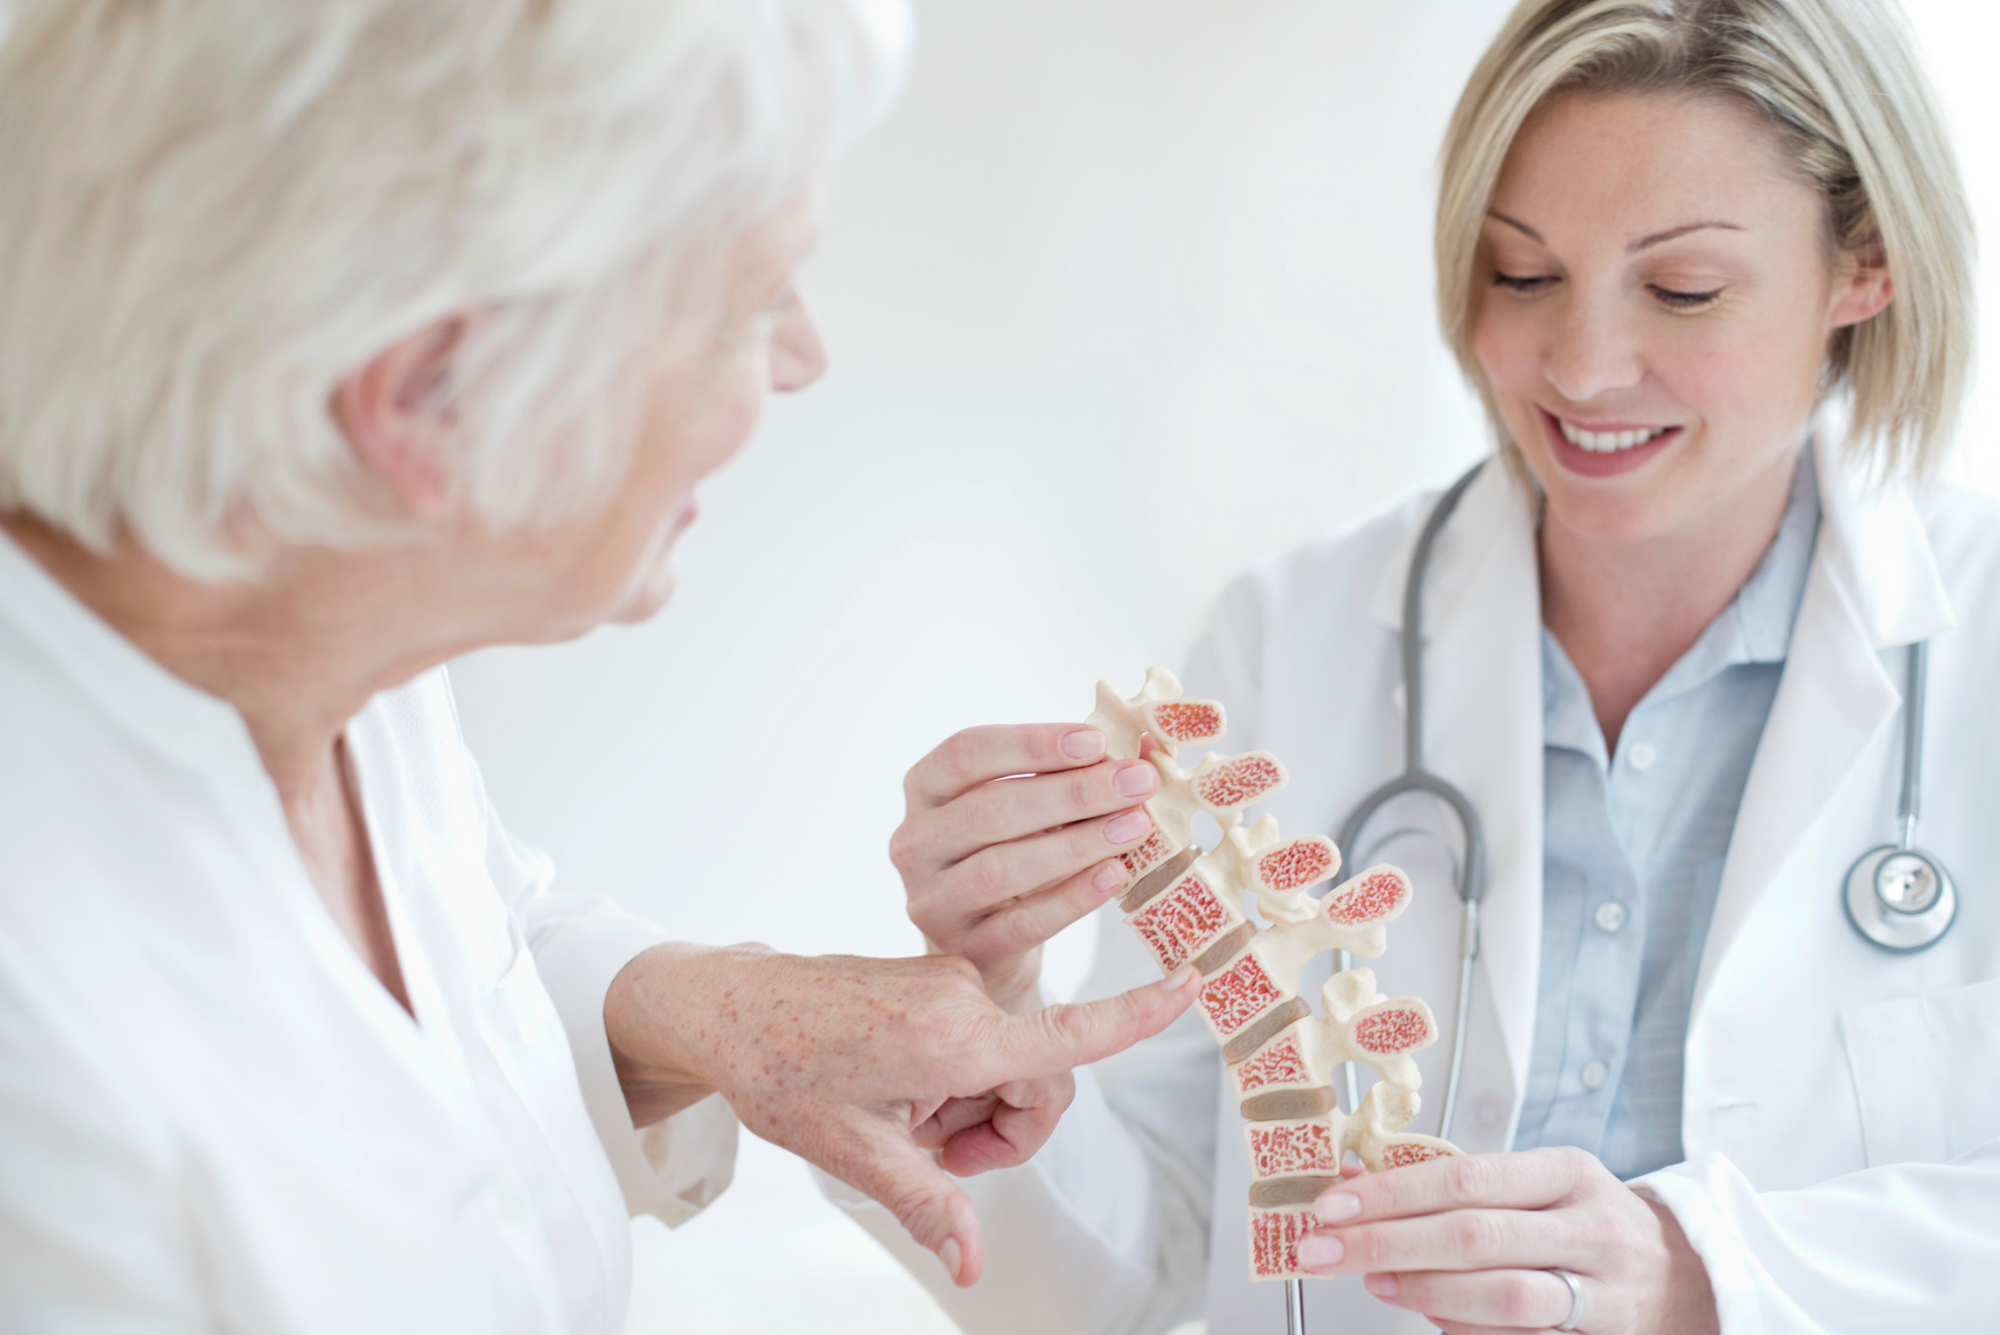 Osteoporosis: A Top 10 Killer of Women (That No One’s Talking About)